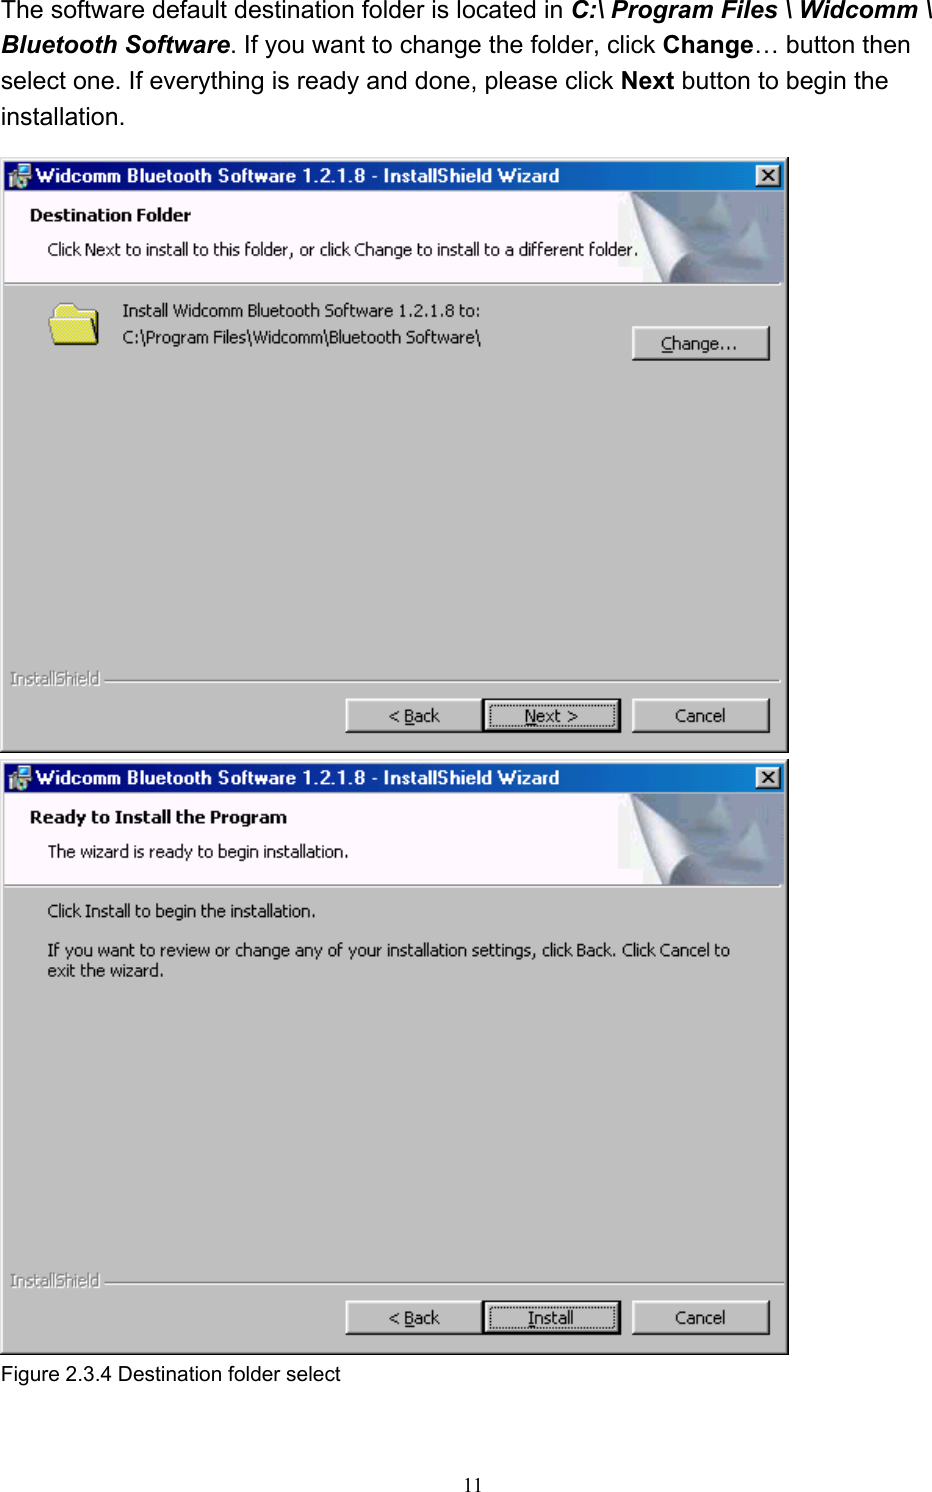  11 The software default destination folder is located in C:\ Program Files \ Widcomm \ Bluetooth Software. If you want to change the folder, click Change… button then select one. If everything is ready and done, please click Next button to begin the installation.   Figure 2.3.4 Destination folder select